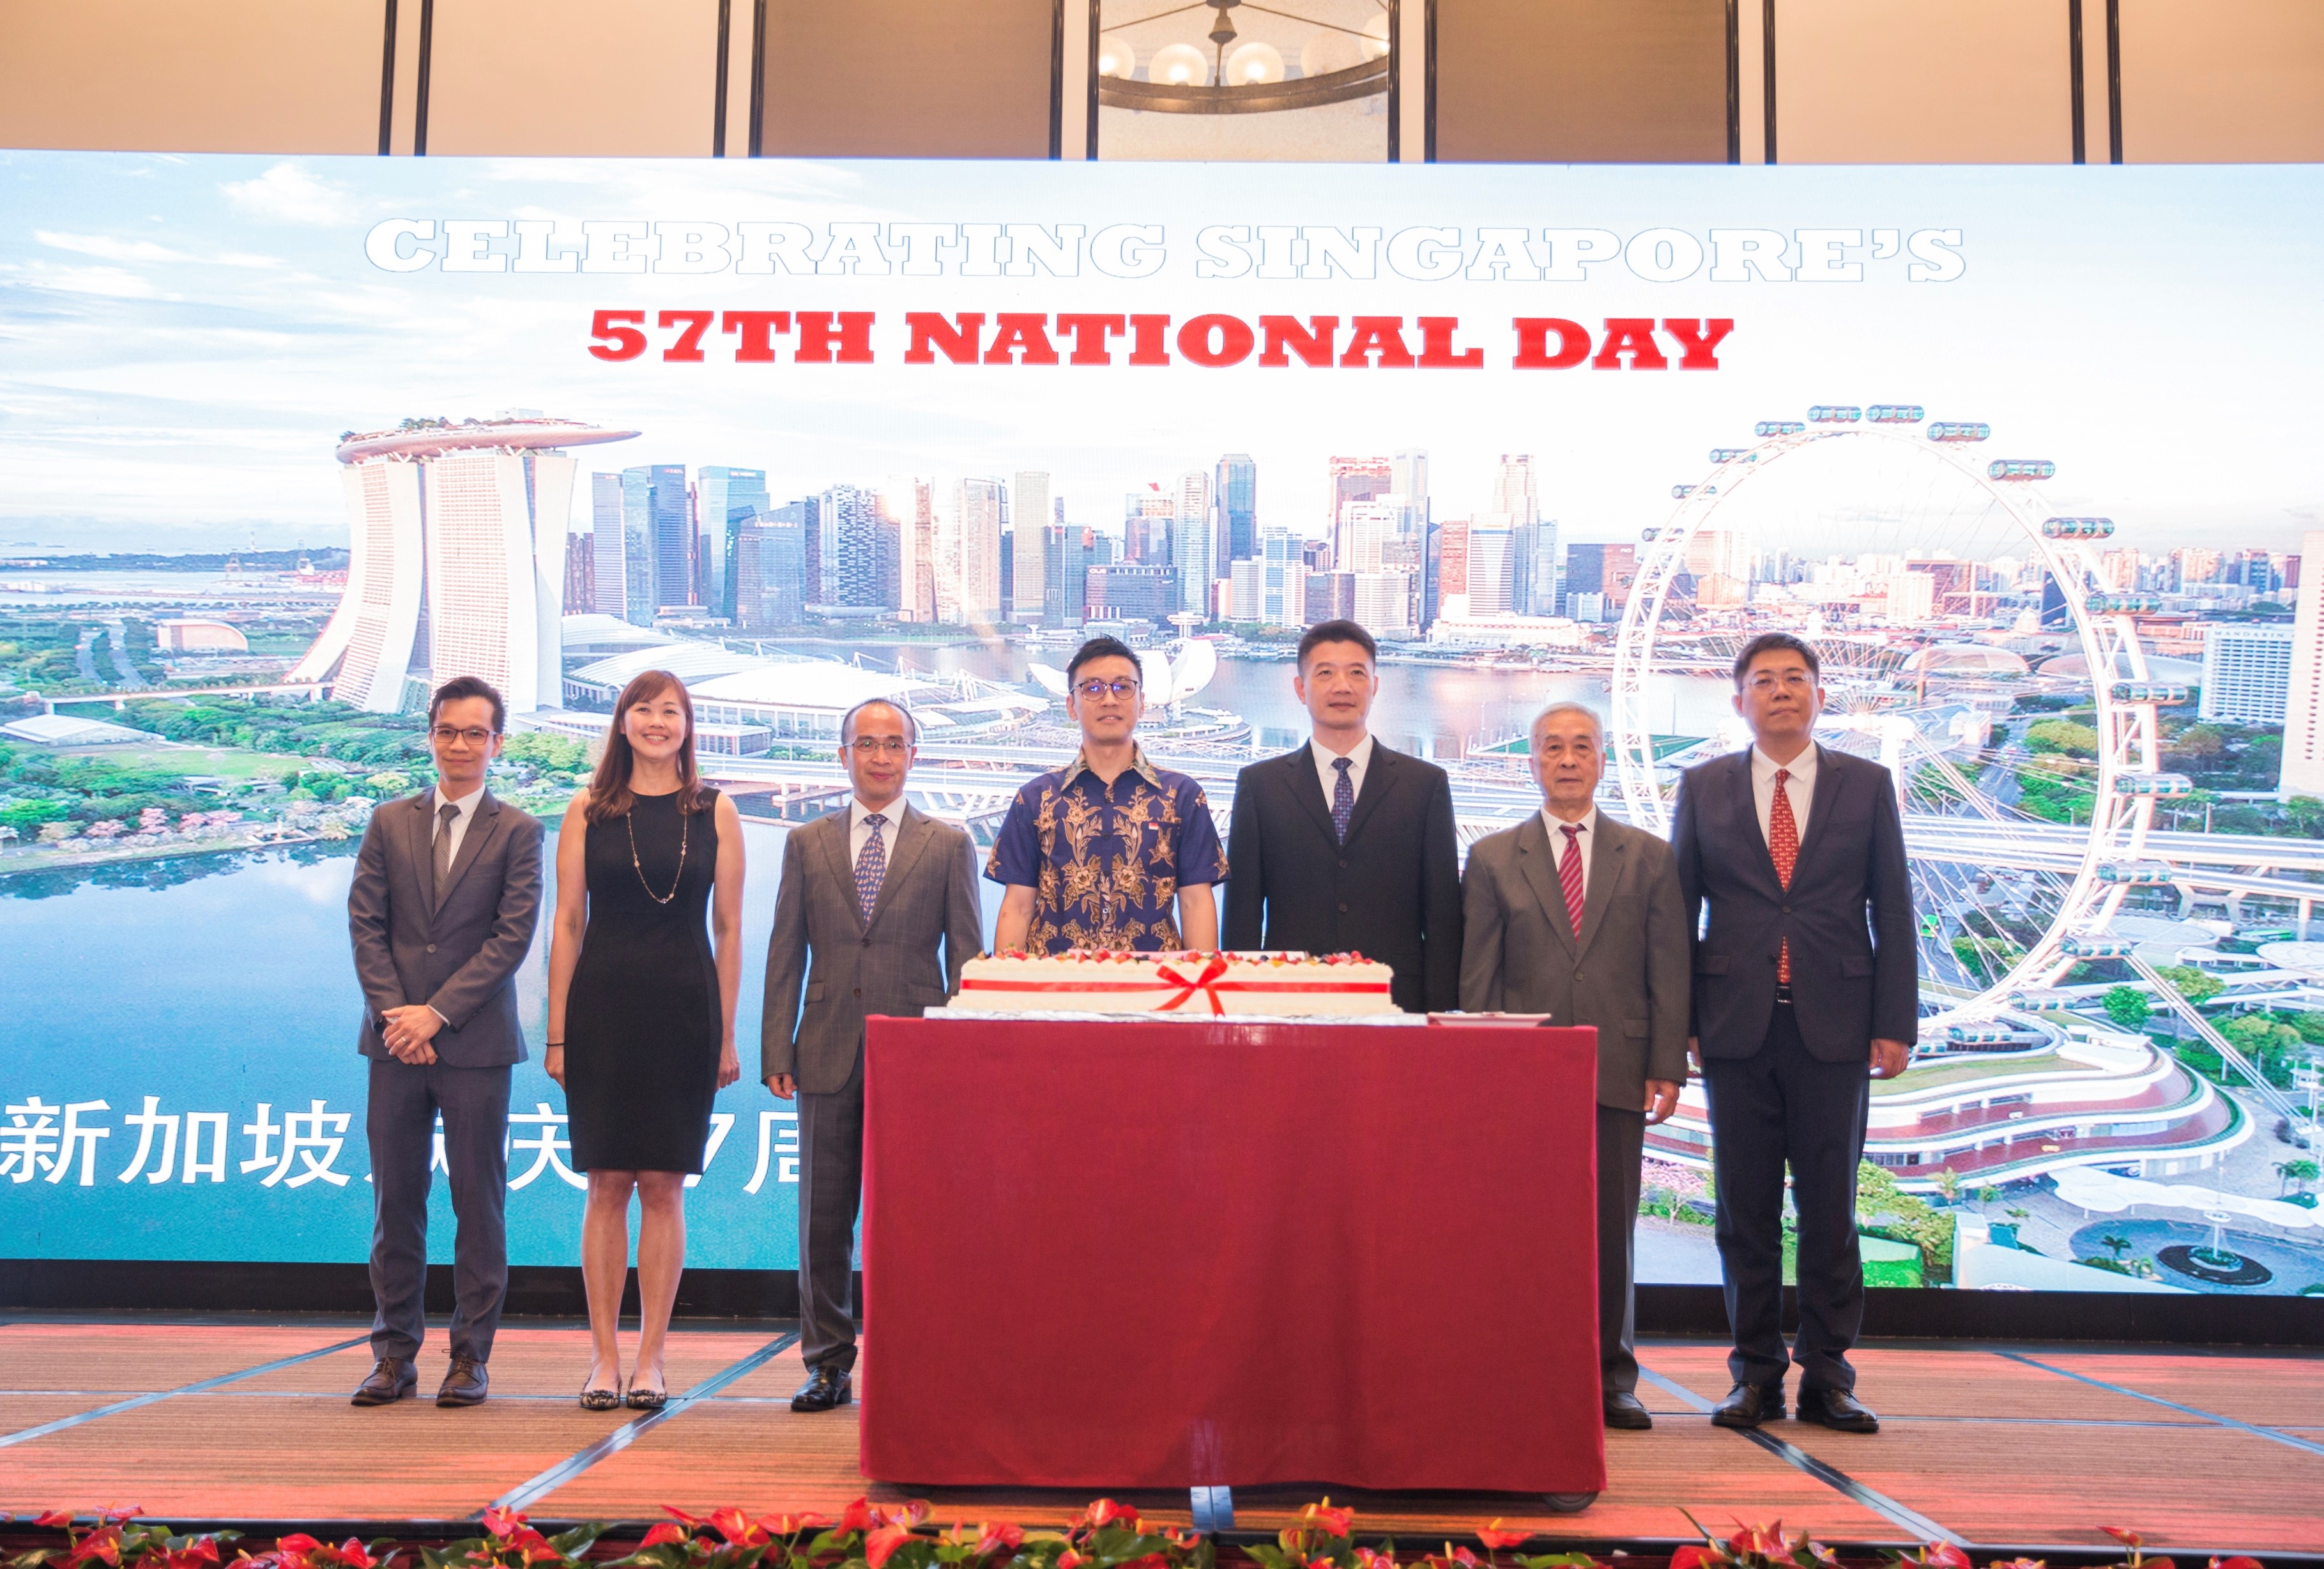 57th National Day Reception